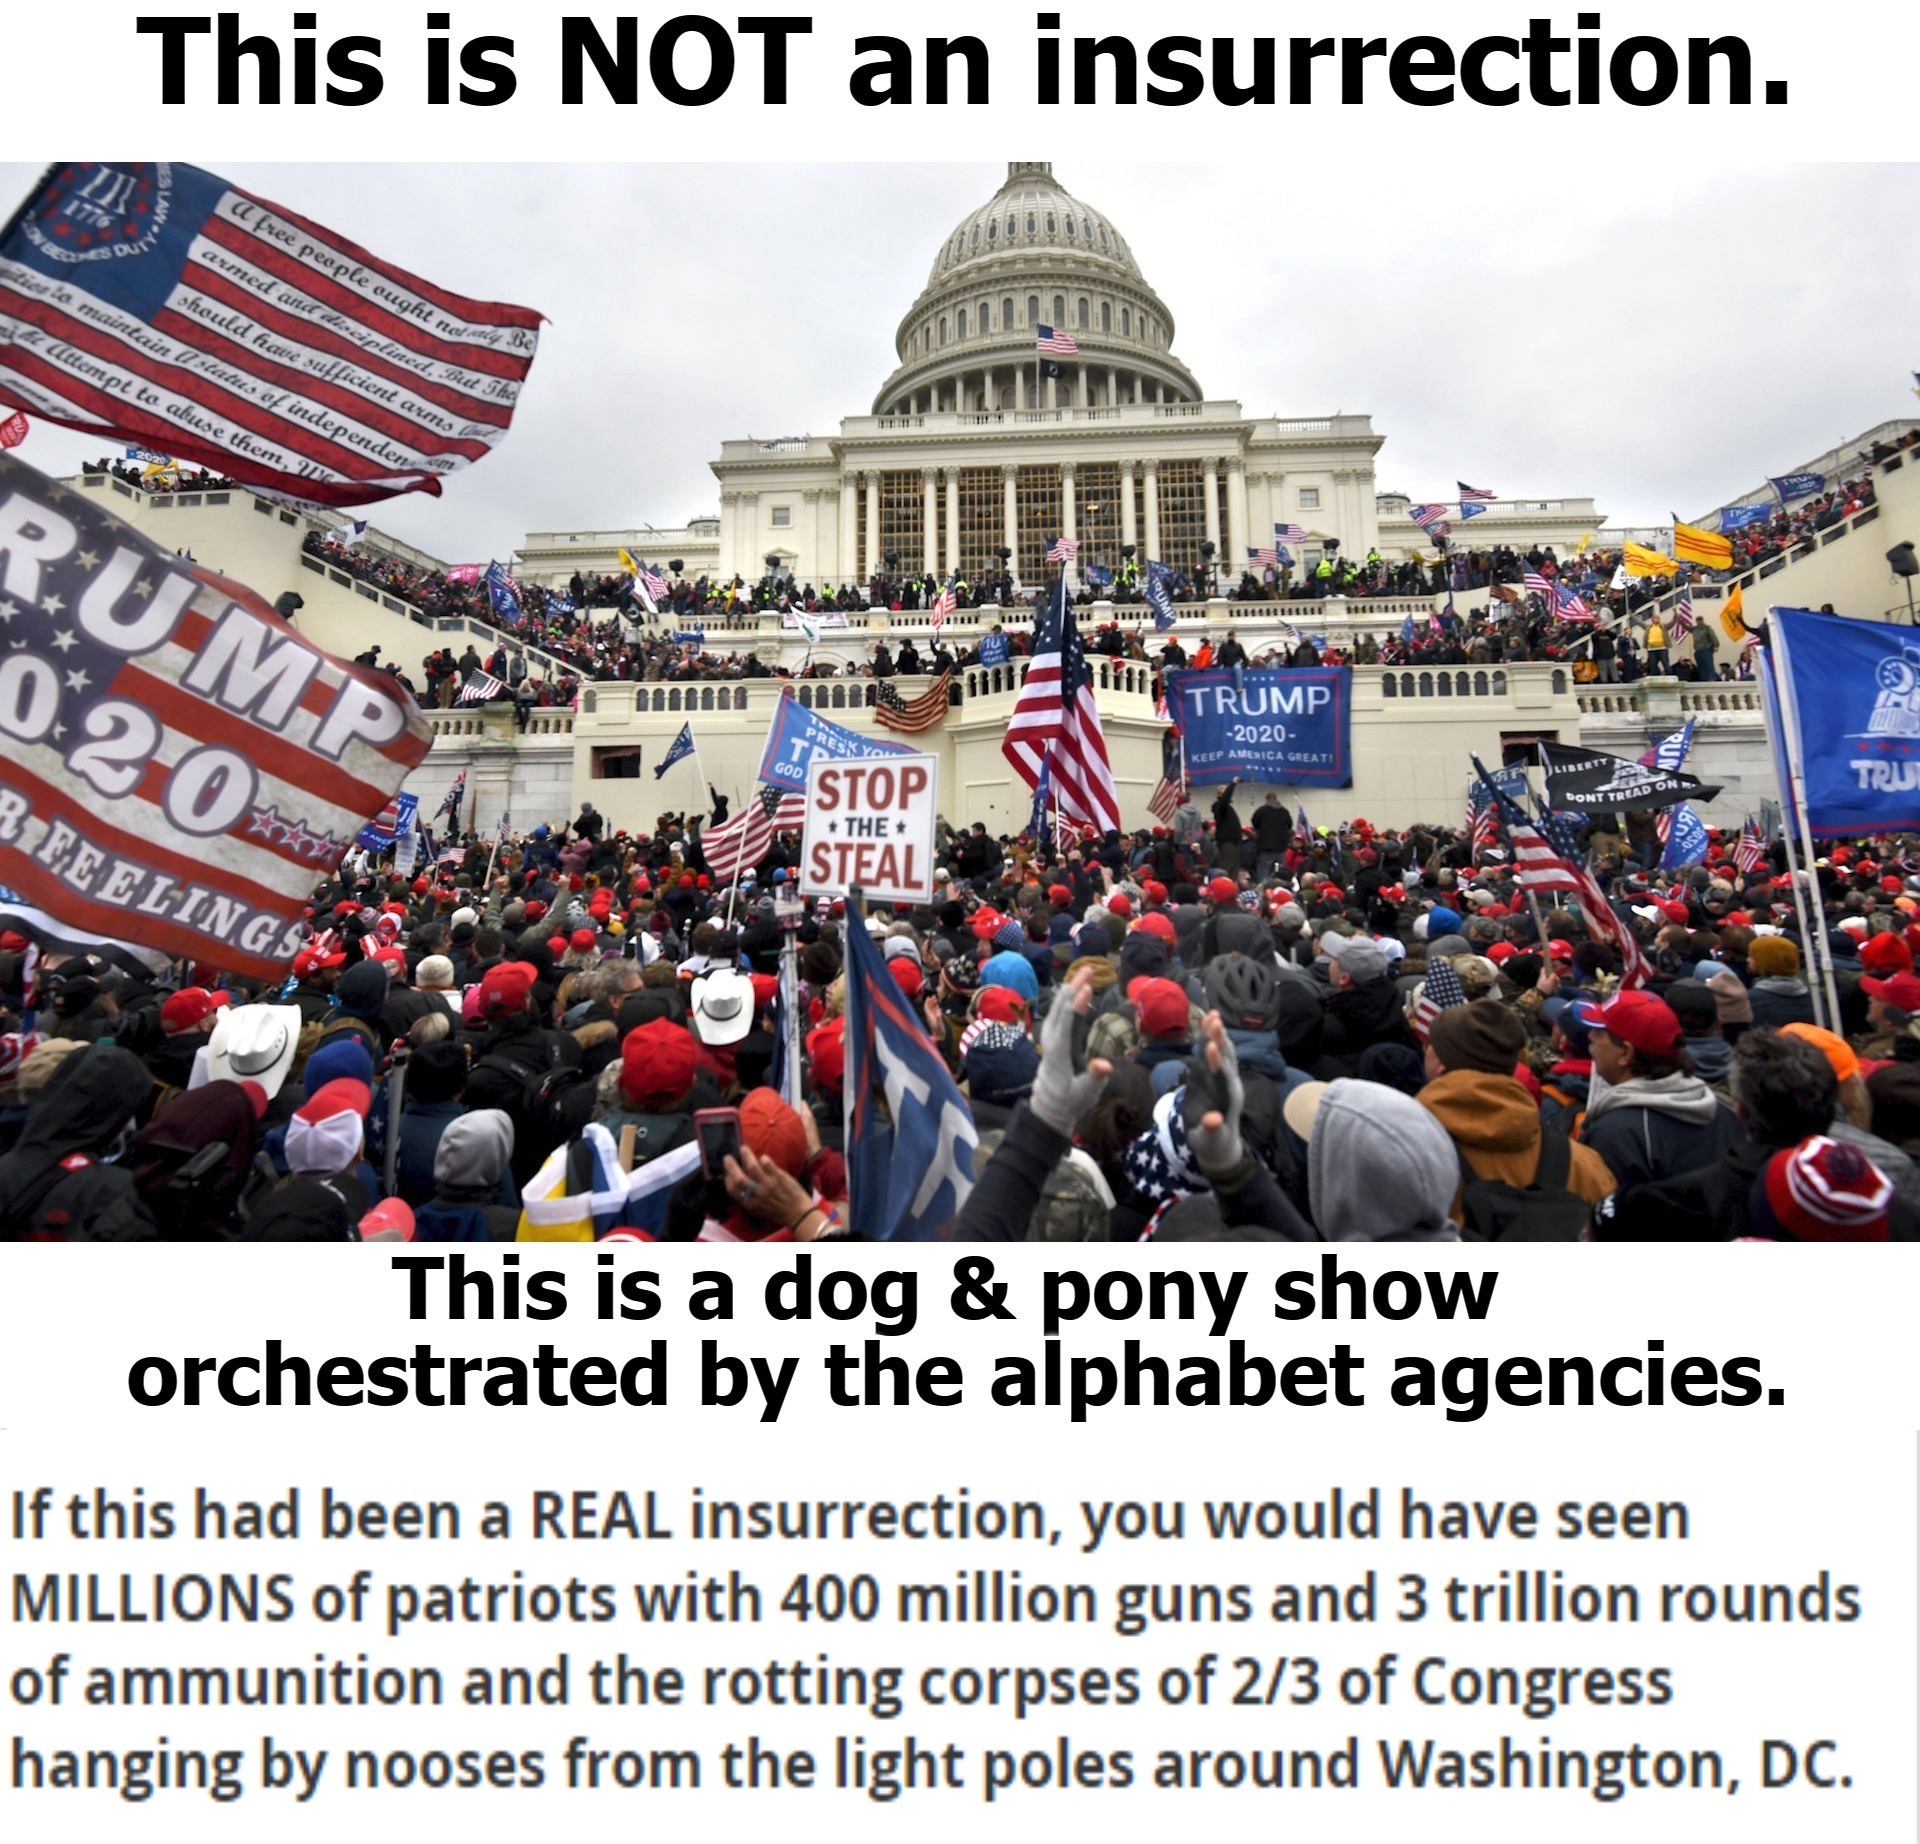 This is NOT an insurrection. | image tagged in insurrection,dog and pony show,false flag,sounds like communist propaganda,crush the commies,tyranny | made w/ Imgflip meme maker